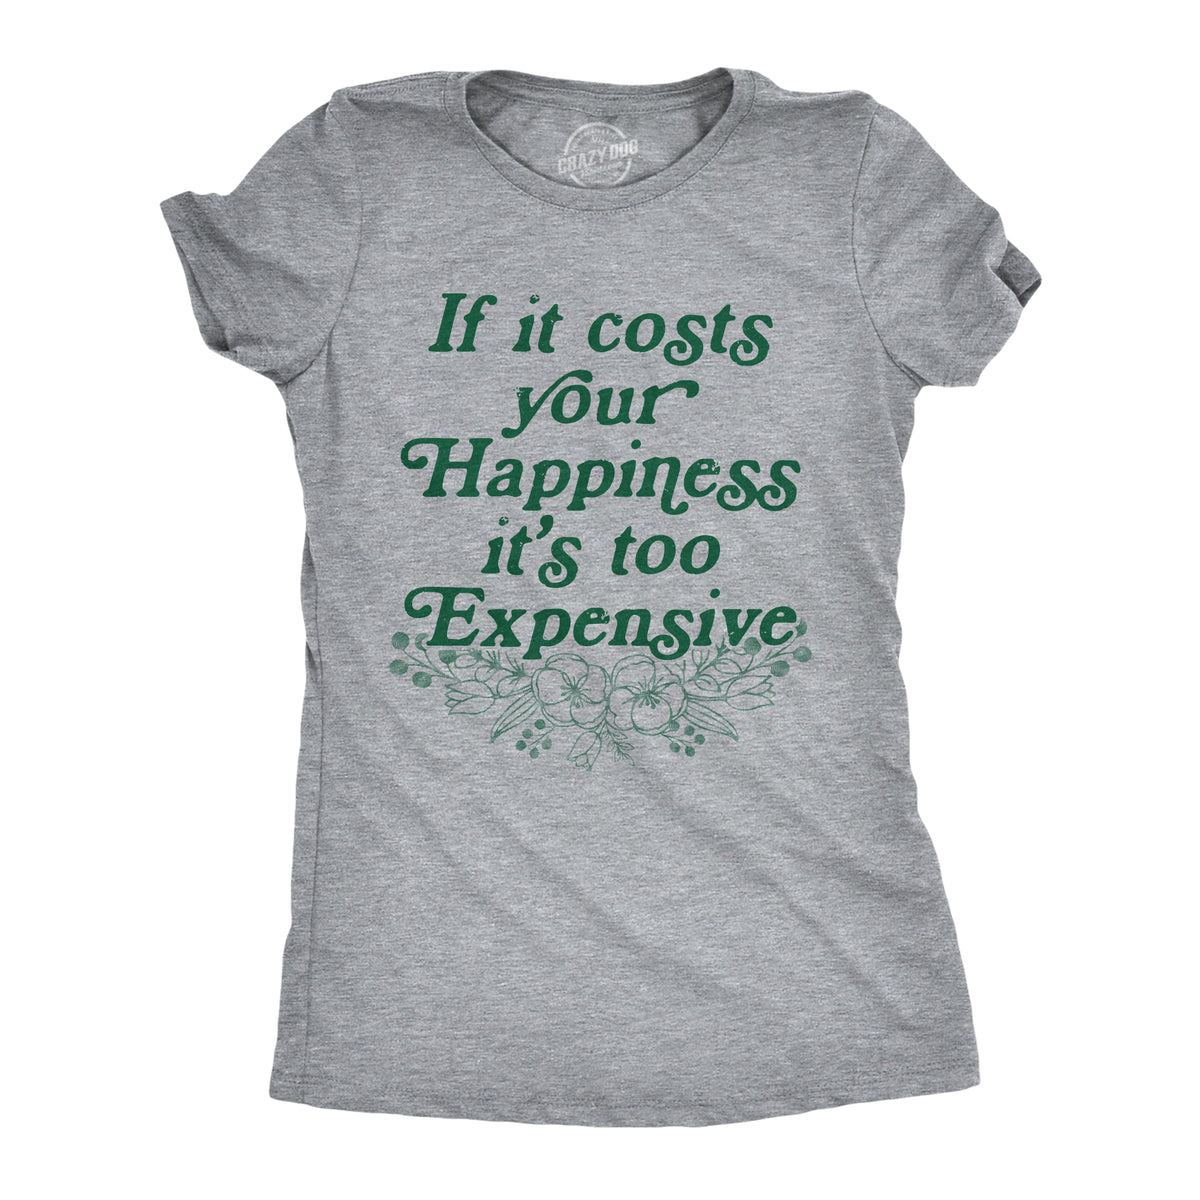 Funny Light Heather Grey - HAPPINESS If It Costs Your Happiness Its Too Expensive Womens T Shirt Nerdy Motivational Tee